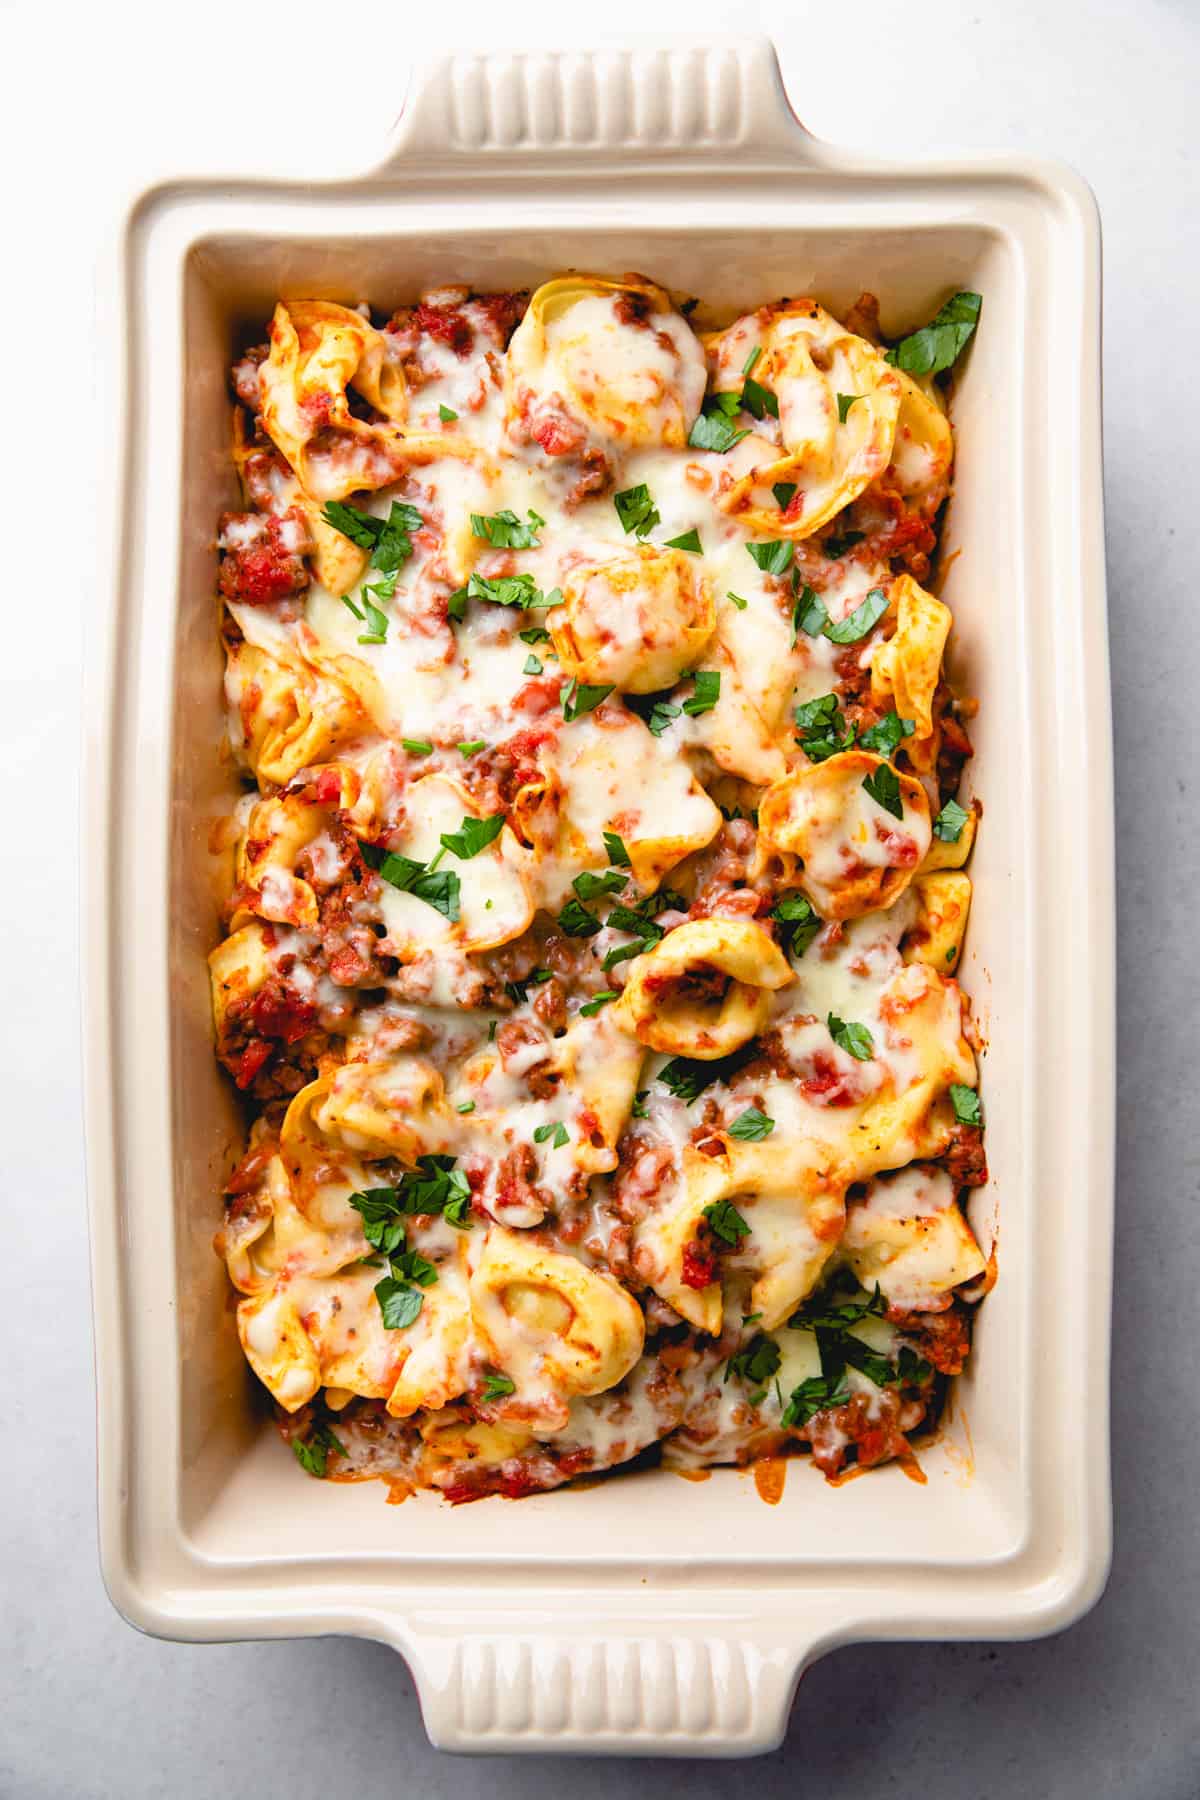 Tortellini with meat sauce and melted cheese in a baking dish.